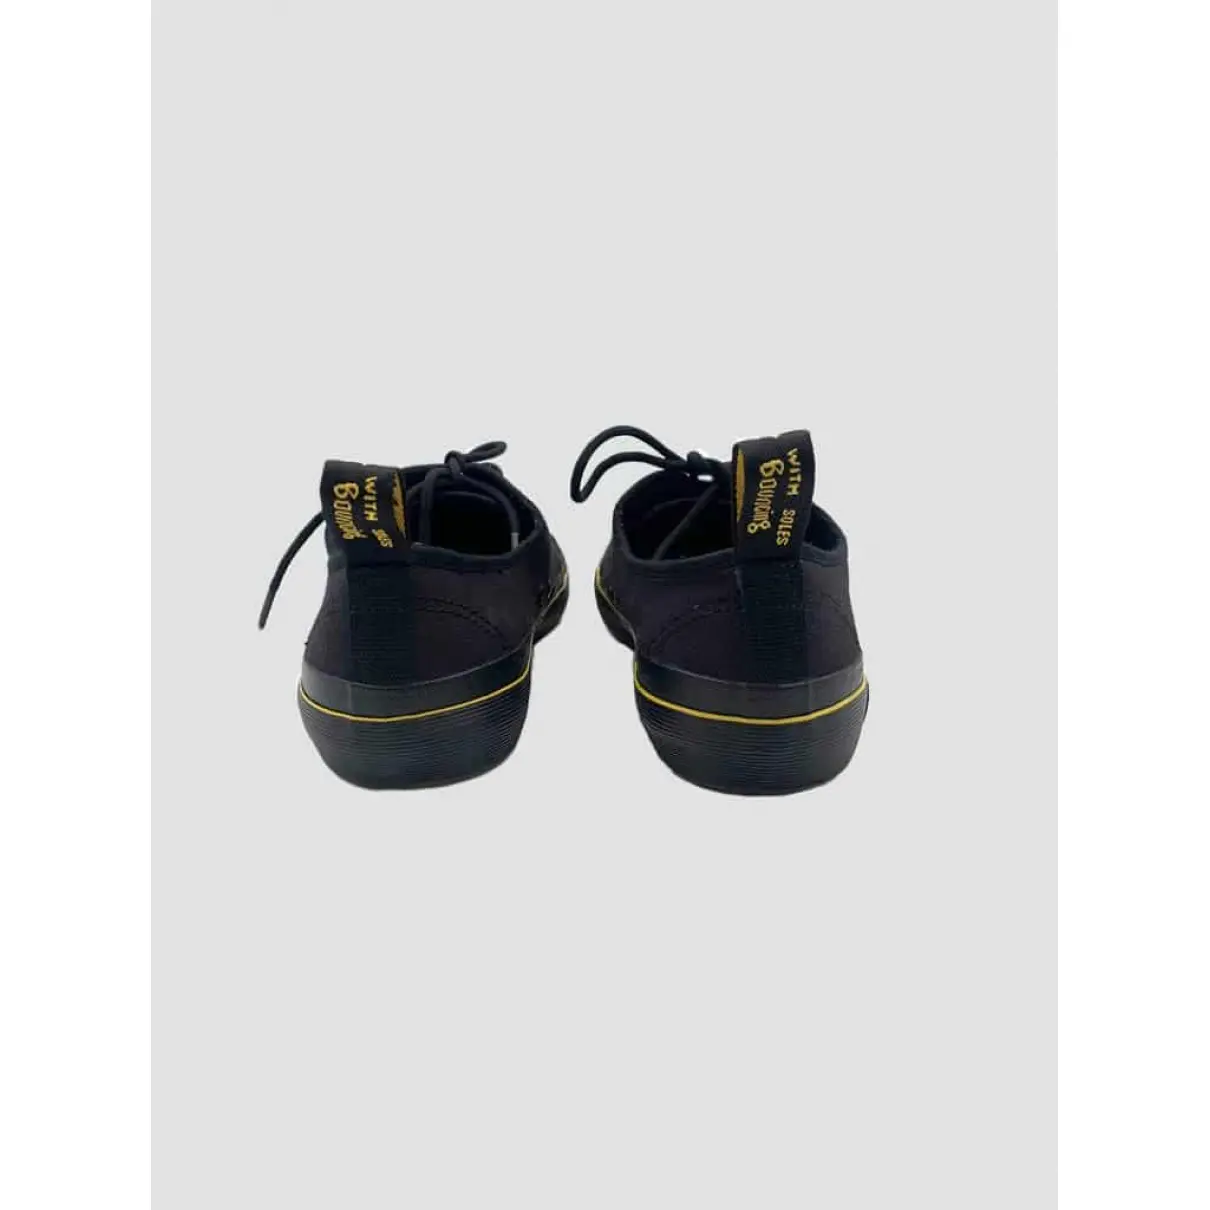 Buy Dr. Martens Cloth trainers online